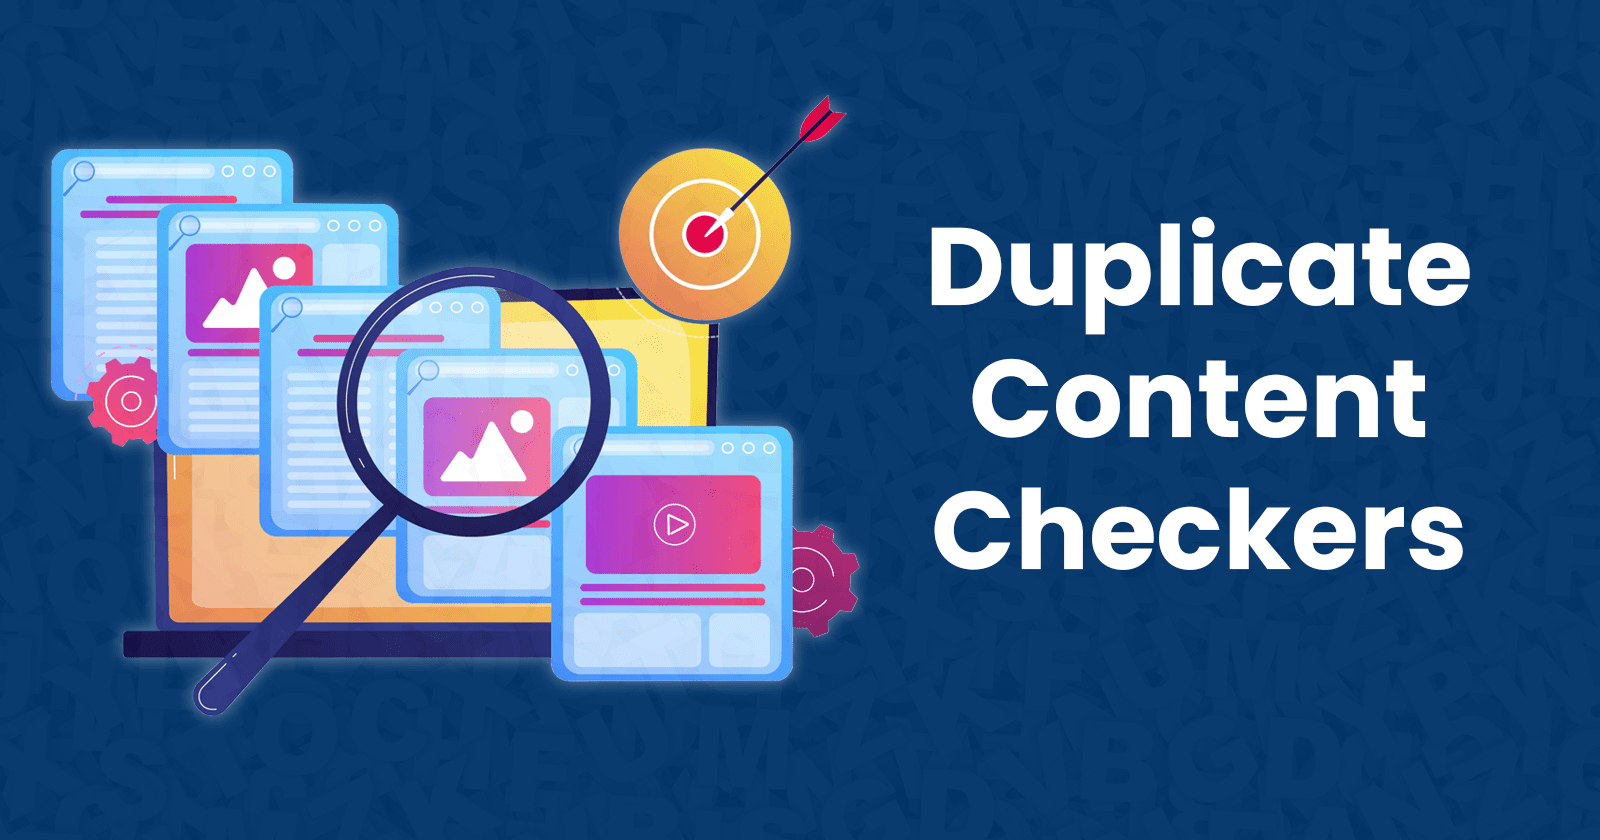 Duplicate Content Checkers for Websites